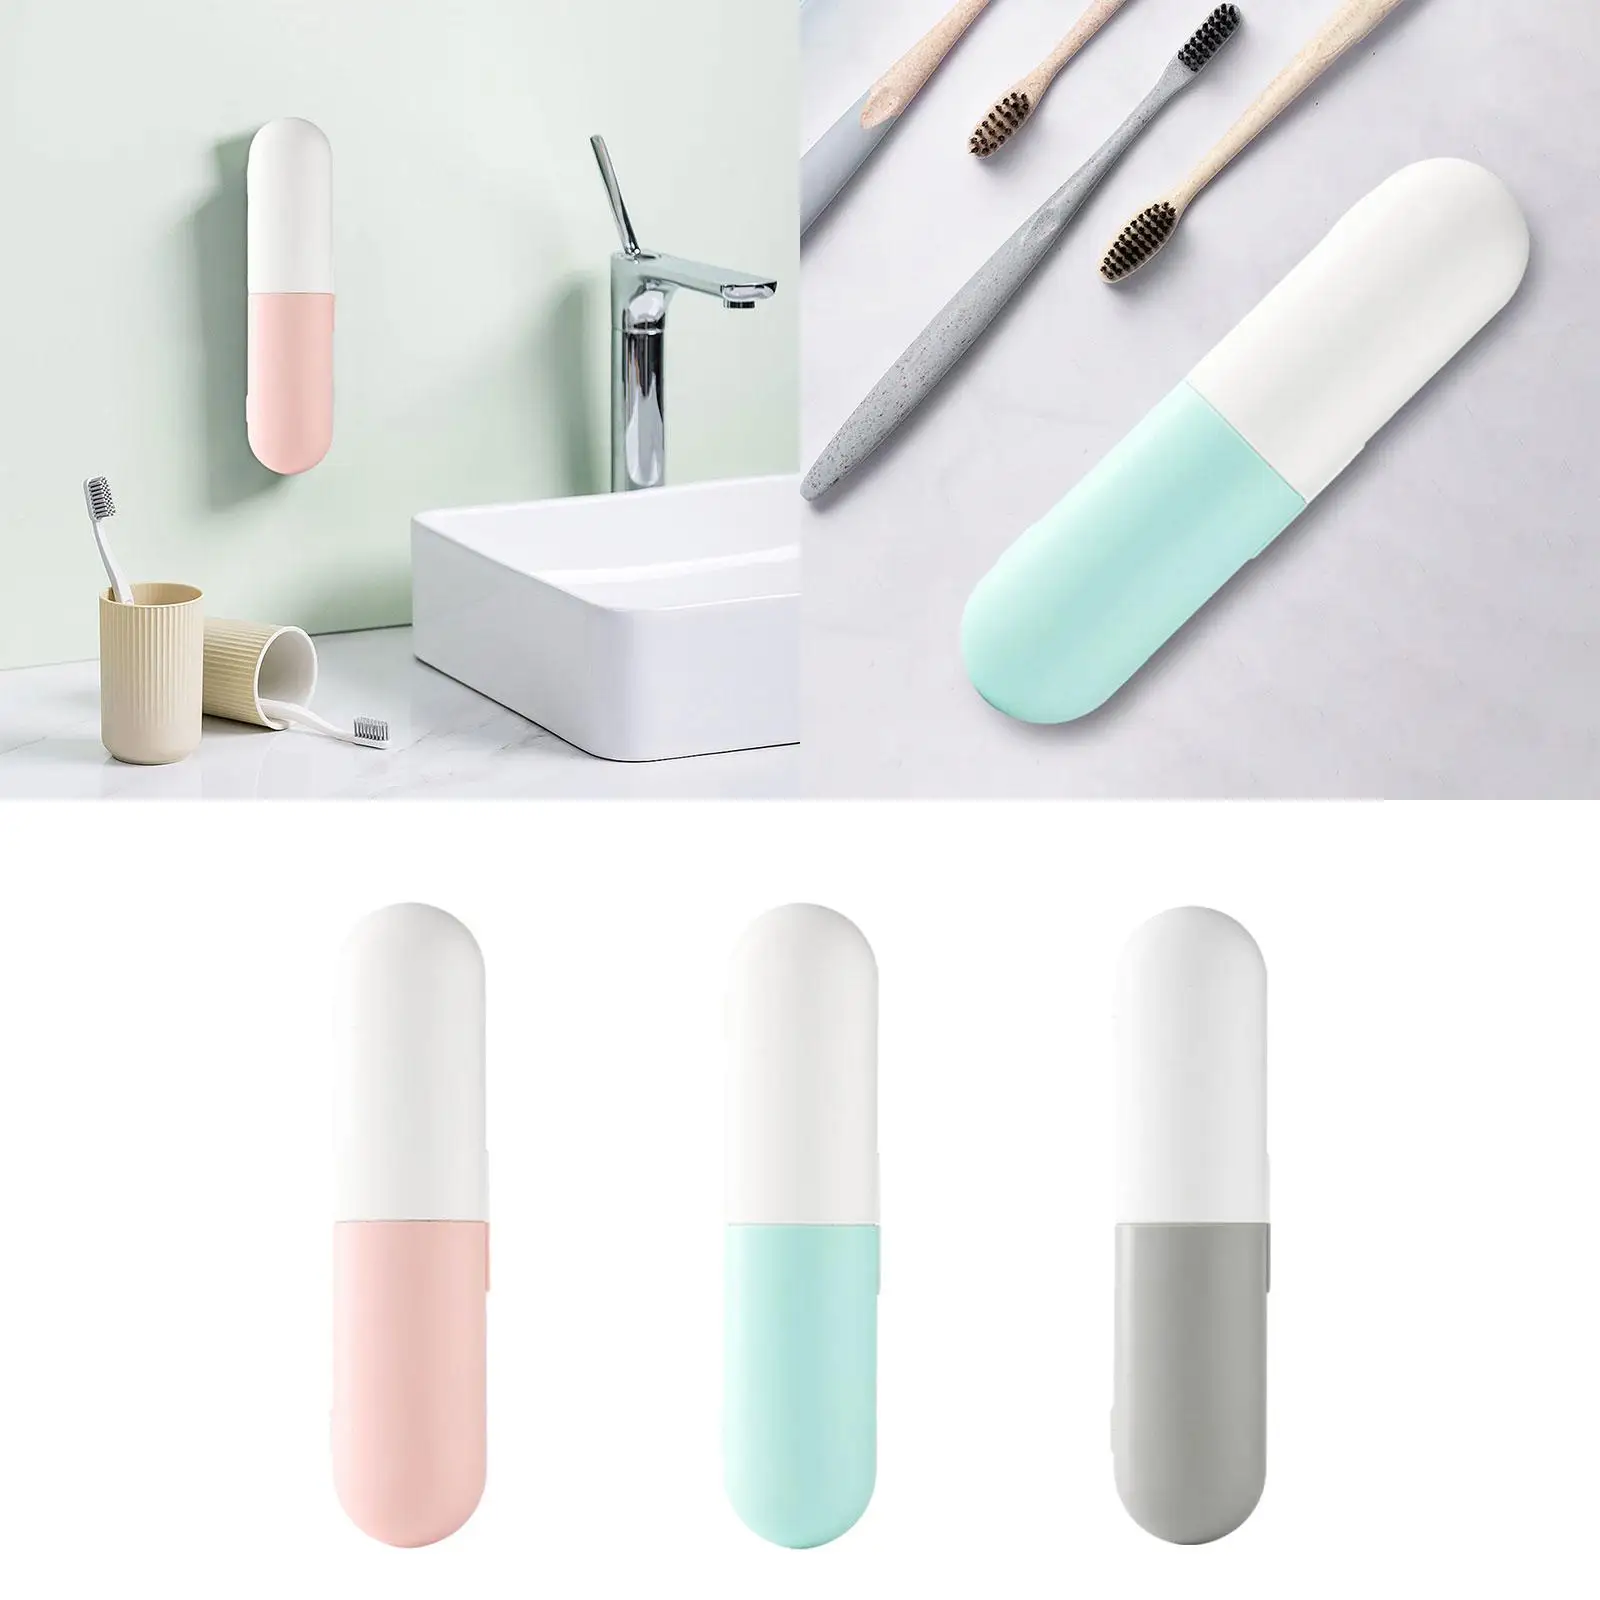 Portable Toothbrush Sanitizer with Cleaning Light Rechargeable Toothbrush Cleaner Holder for Business Trip Home Hotel Travel